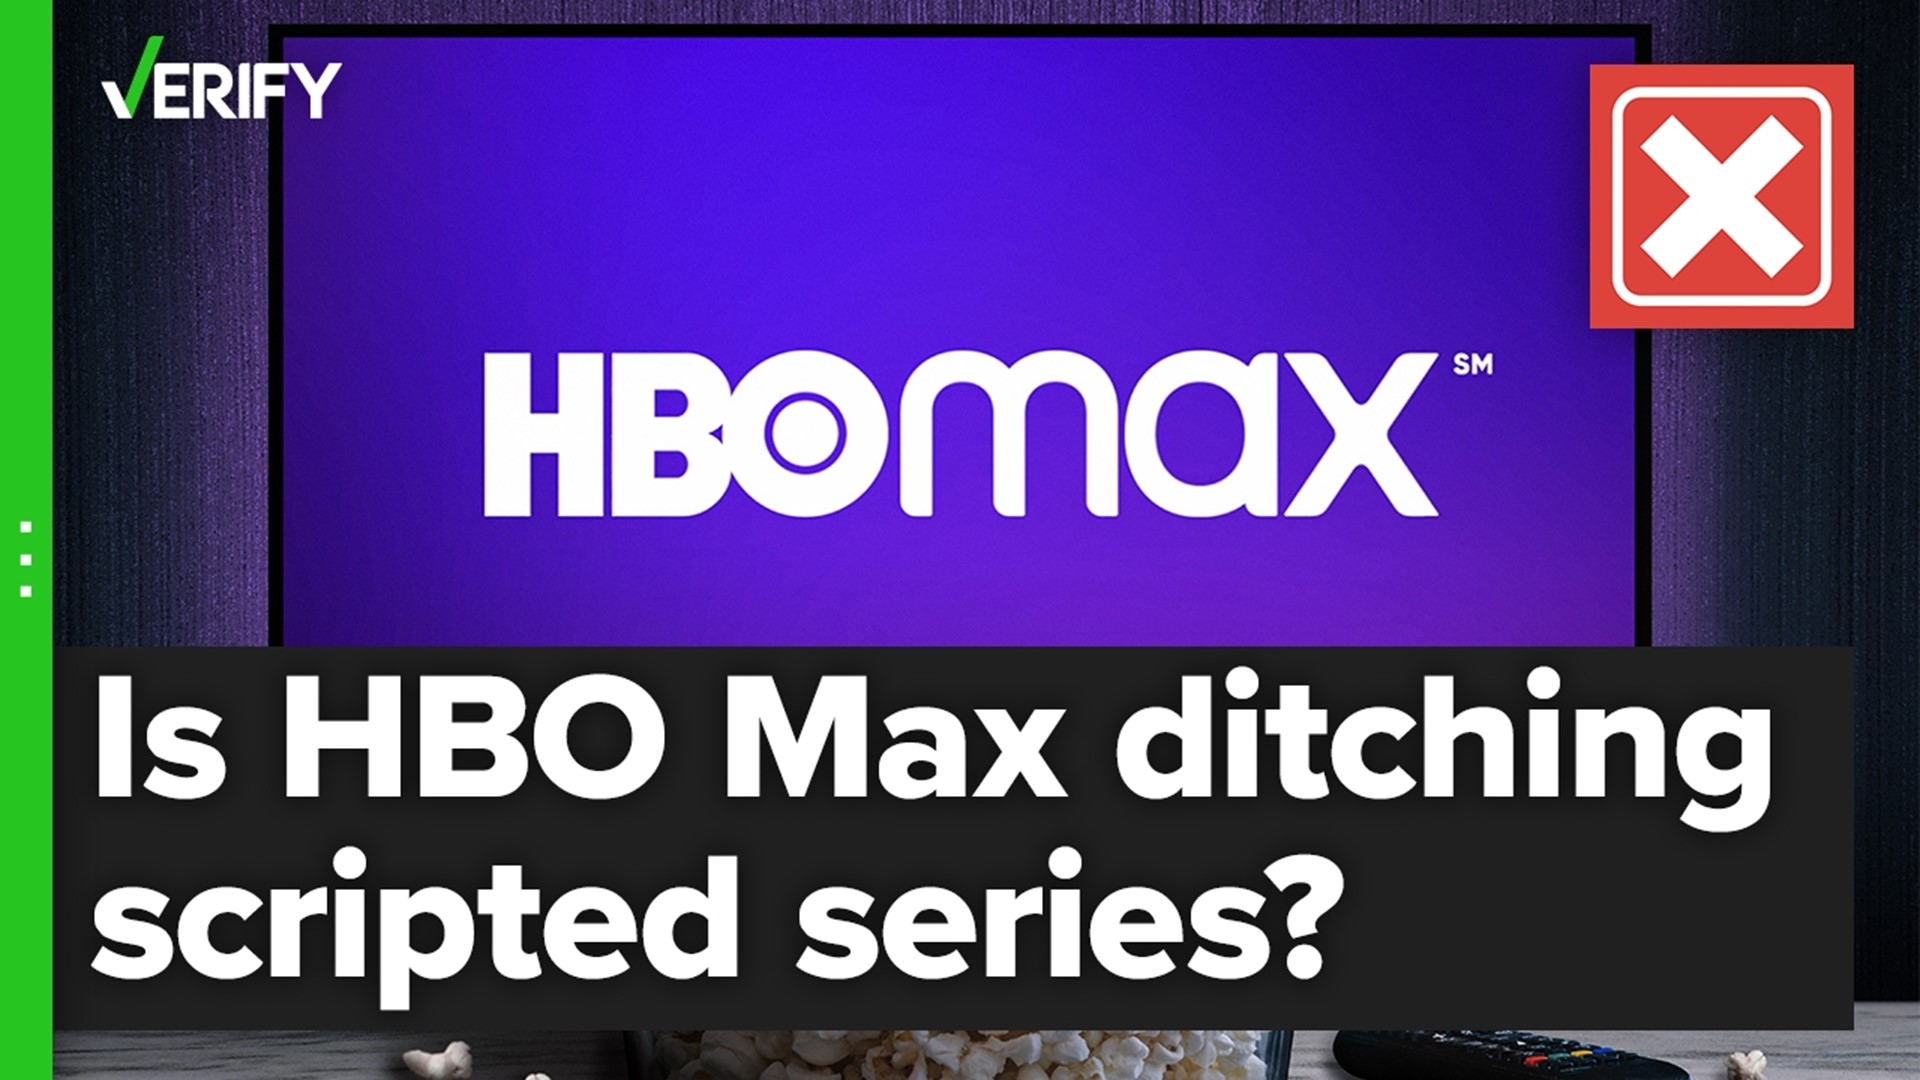 Warner Bros. plans to merge HBO Max with discovery+, but the new service will still have scripted series in addition to reality shows.